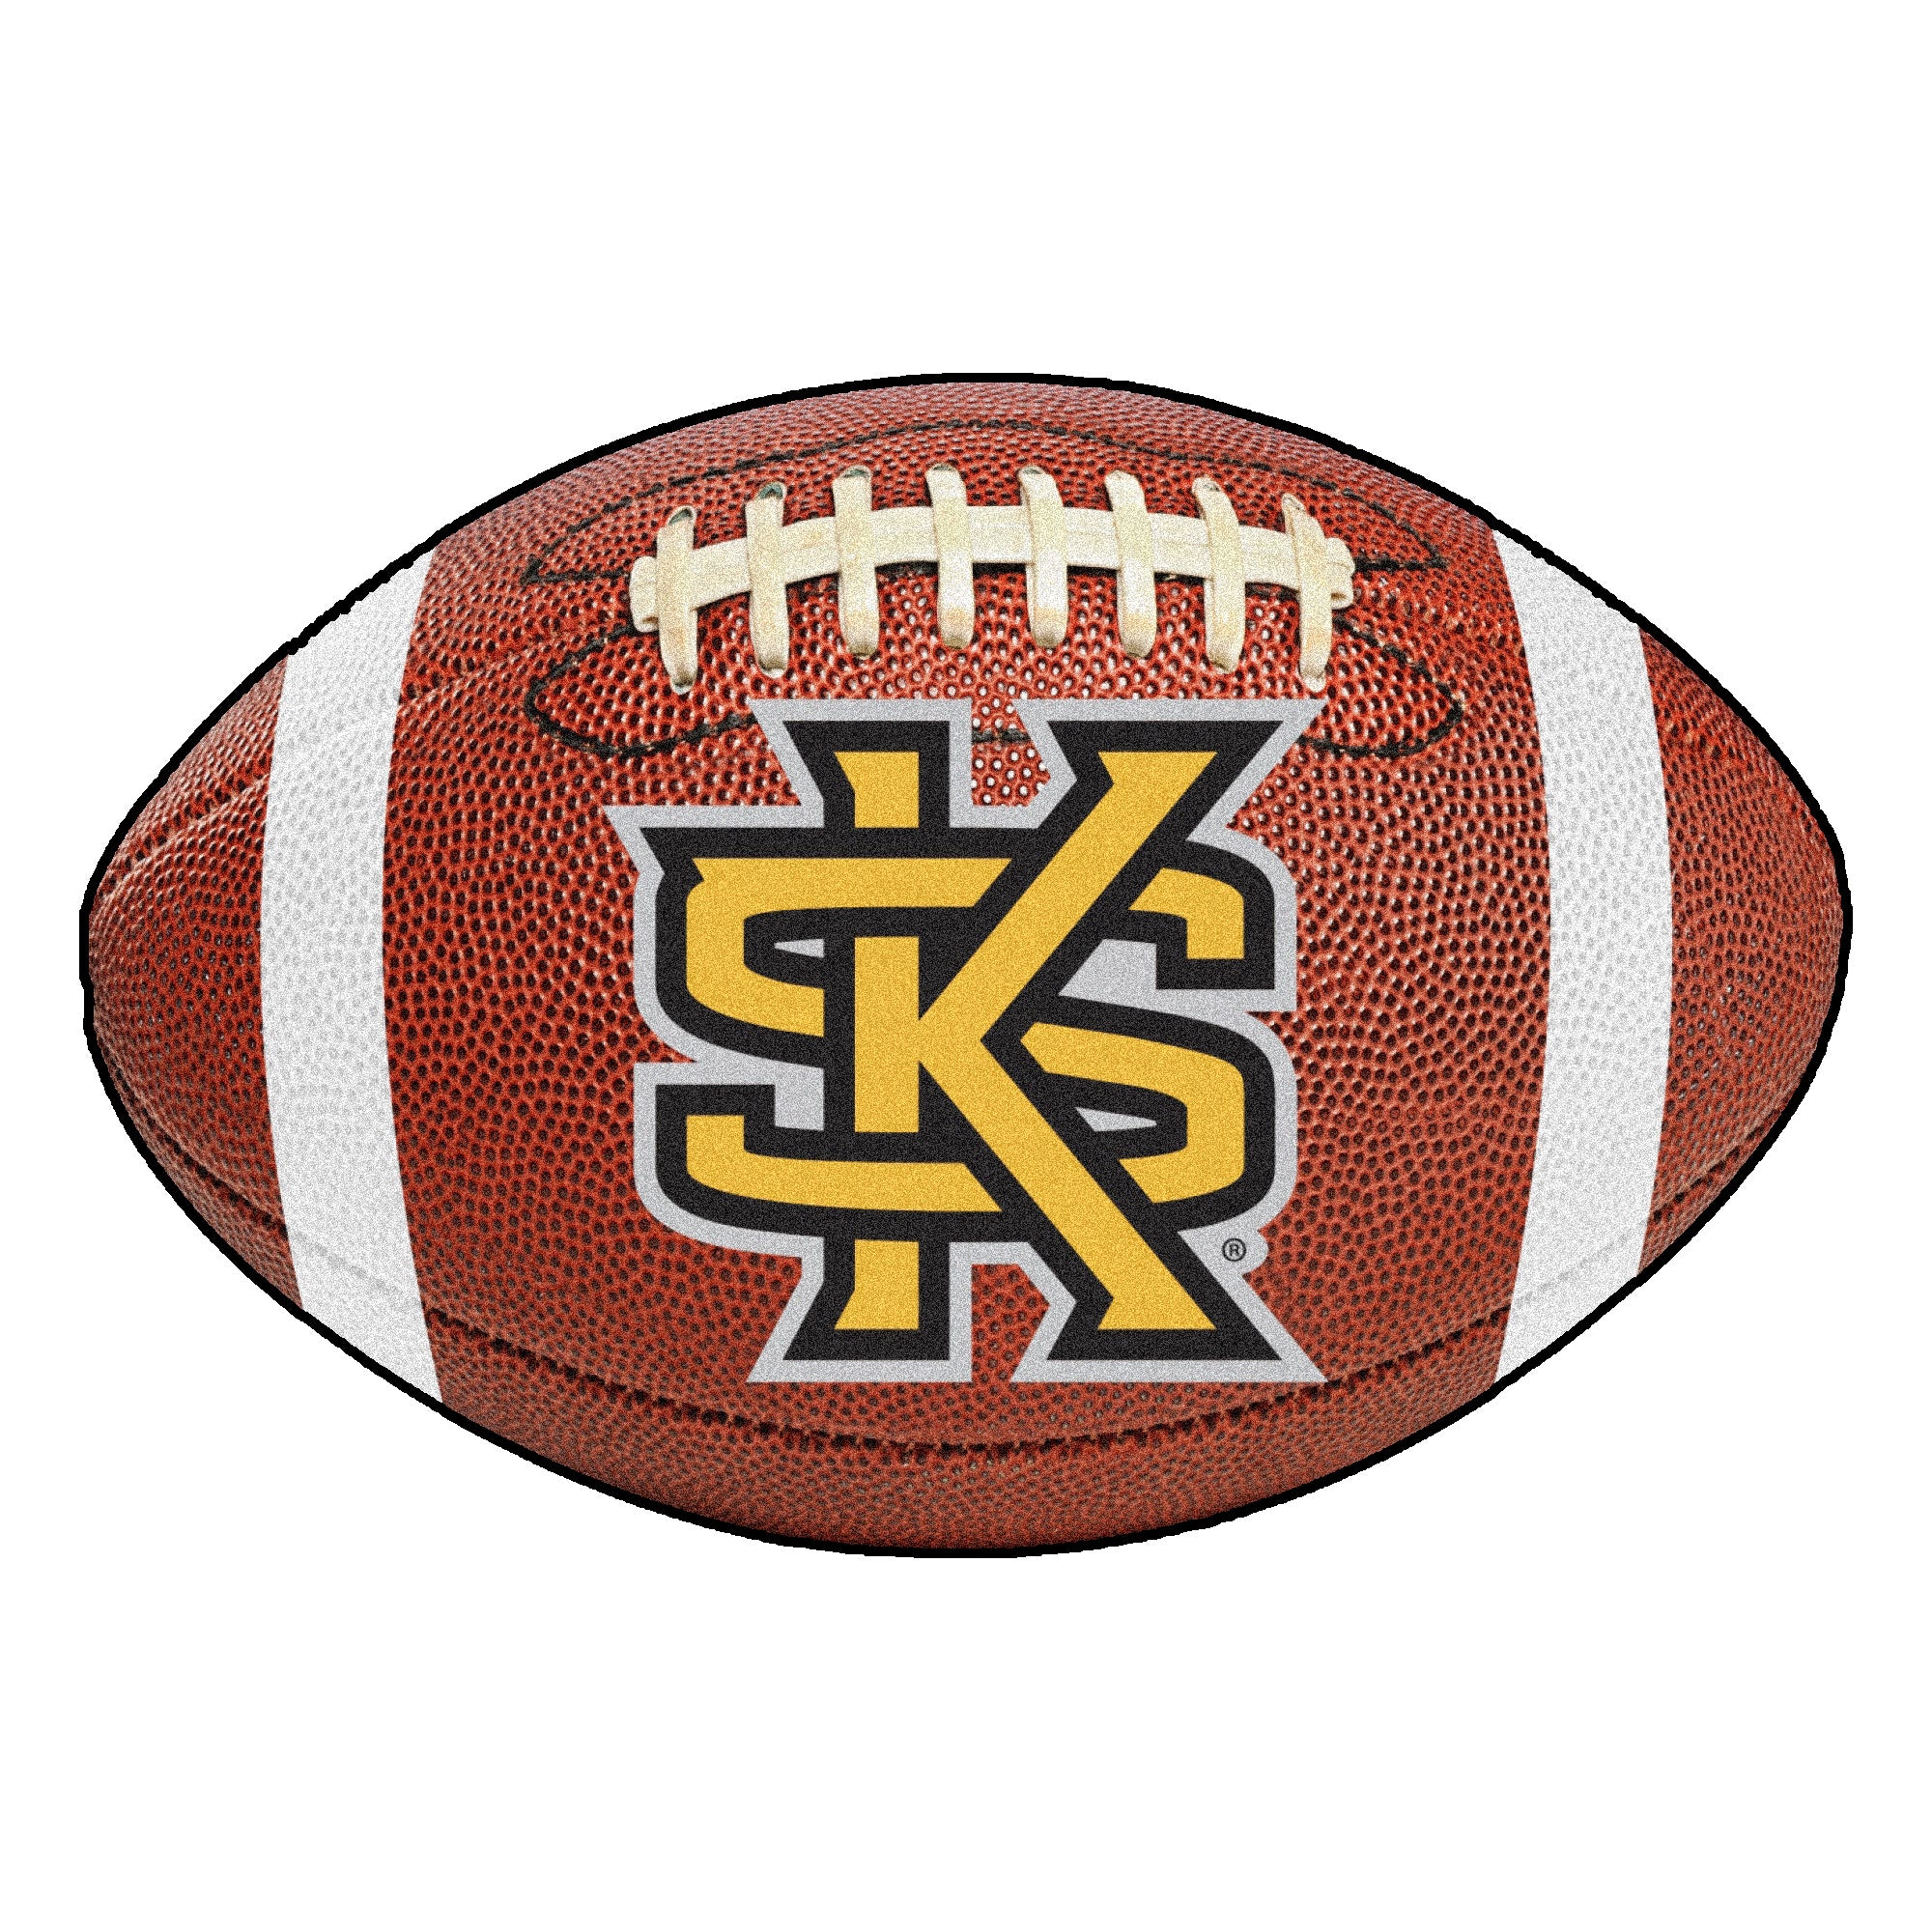 FANMATS, Kennesaw State University Football Rug - 20.5in. x 32.5in.